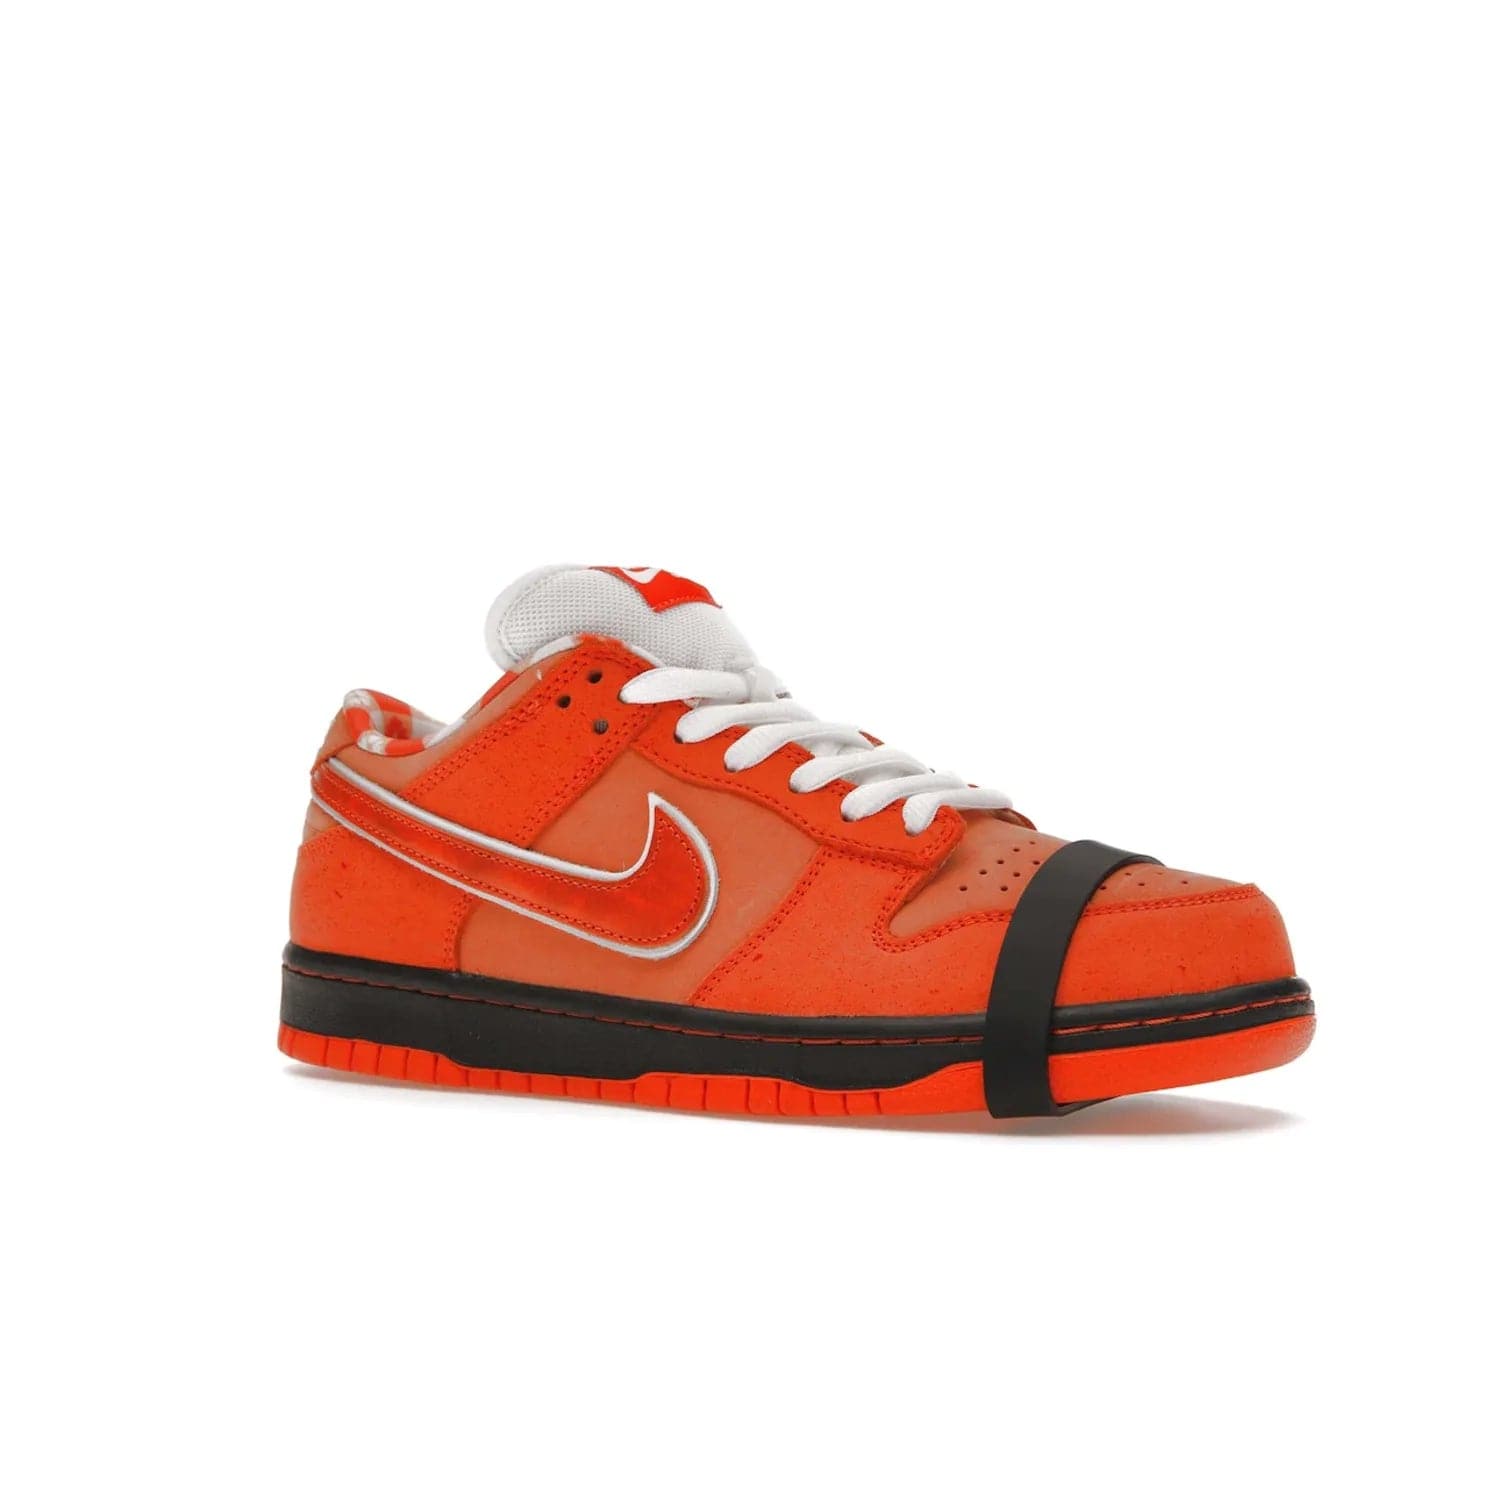 Nike SB Dunk Low Concepts Orange Lobster - Image 4 - Only at www.BallersClubKickz.com - Make a statement with the Nike SB Dunk Low Concepts Orange Lobster. Variety of orange hues, nubuck upper, bib-inspired lining & rubber outsole create bold look & comfortable blend of style. Available December 20th, 2022.